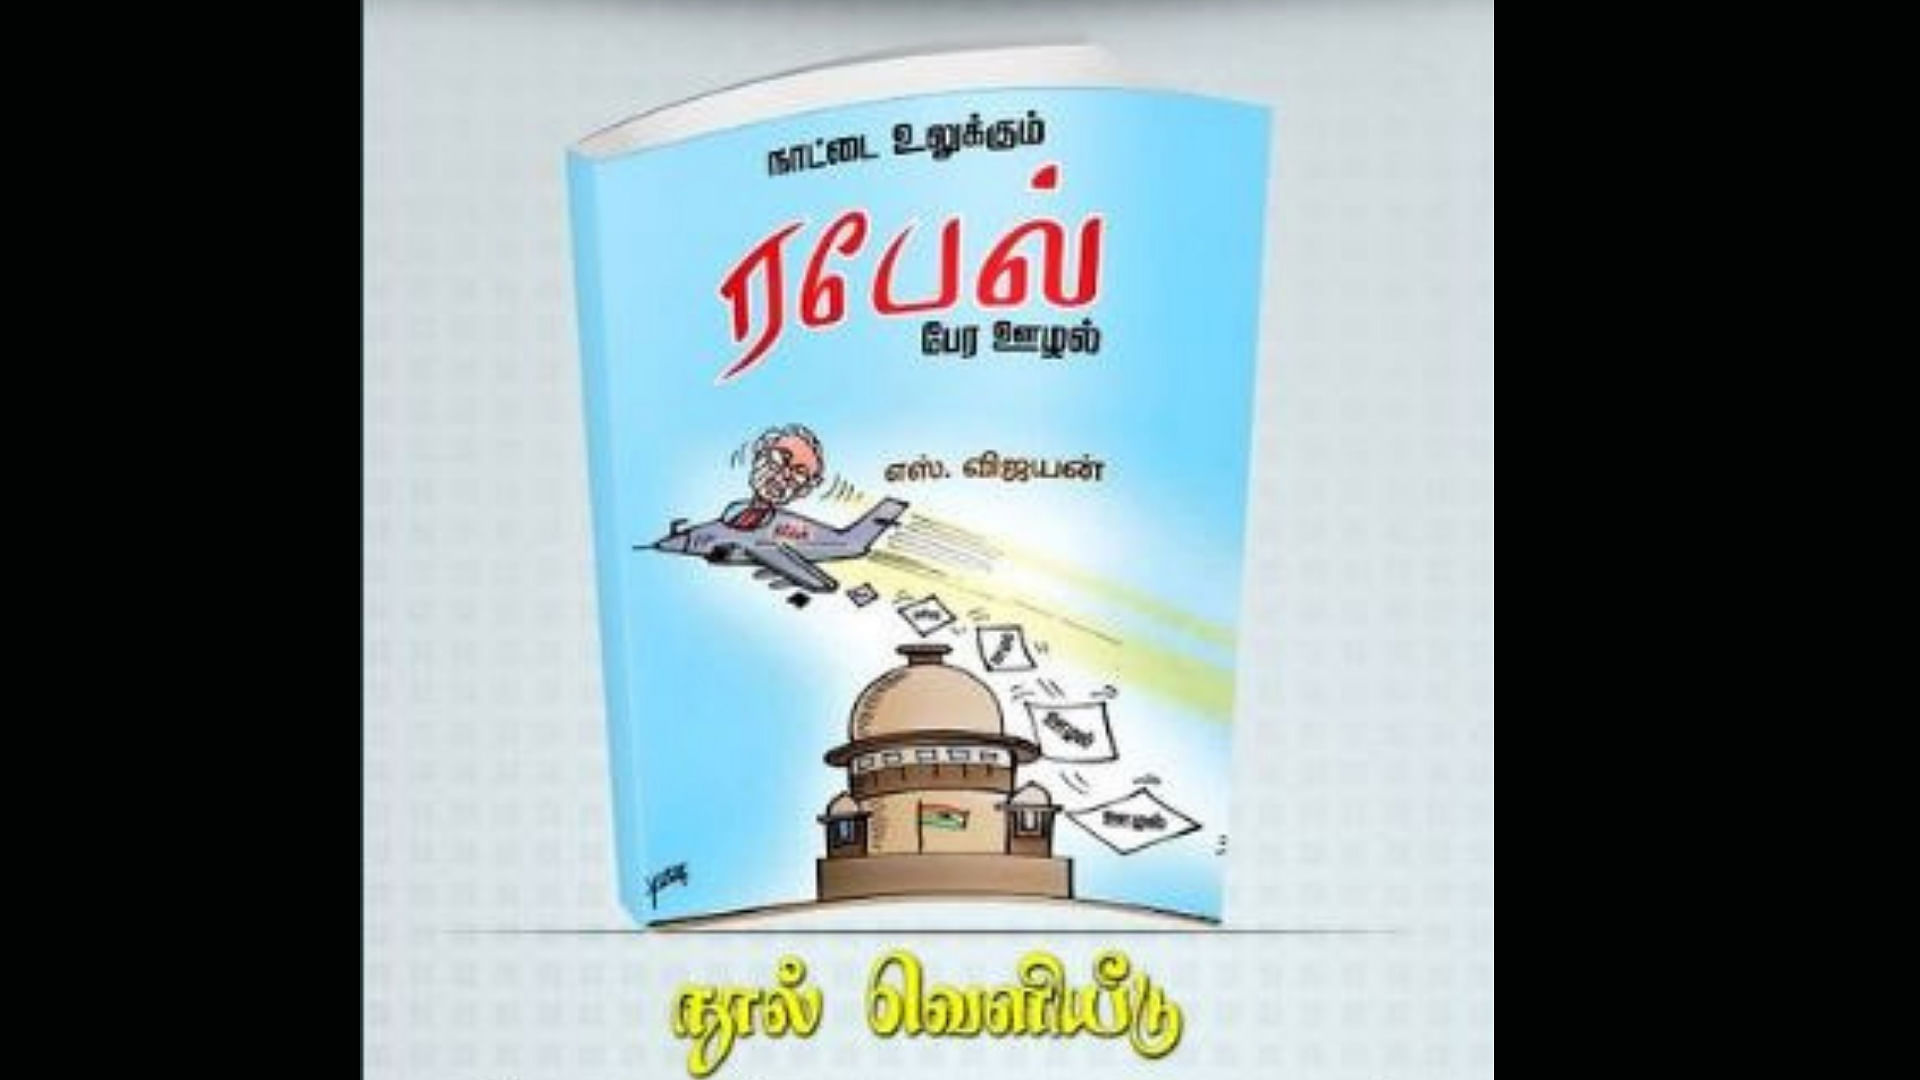 The book was slated to be released on Tuesday, 2 April.